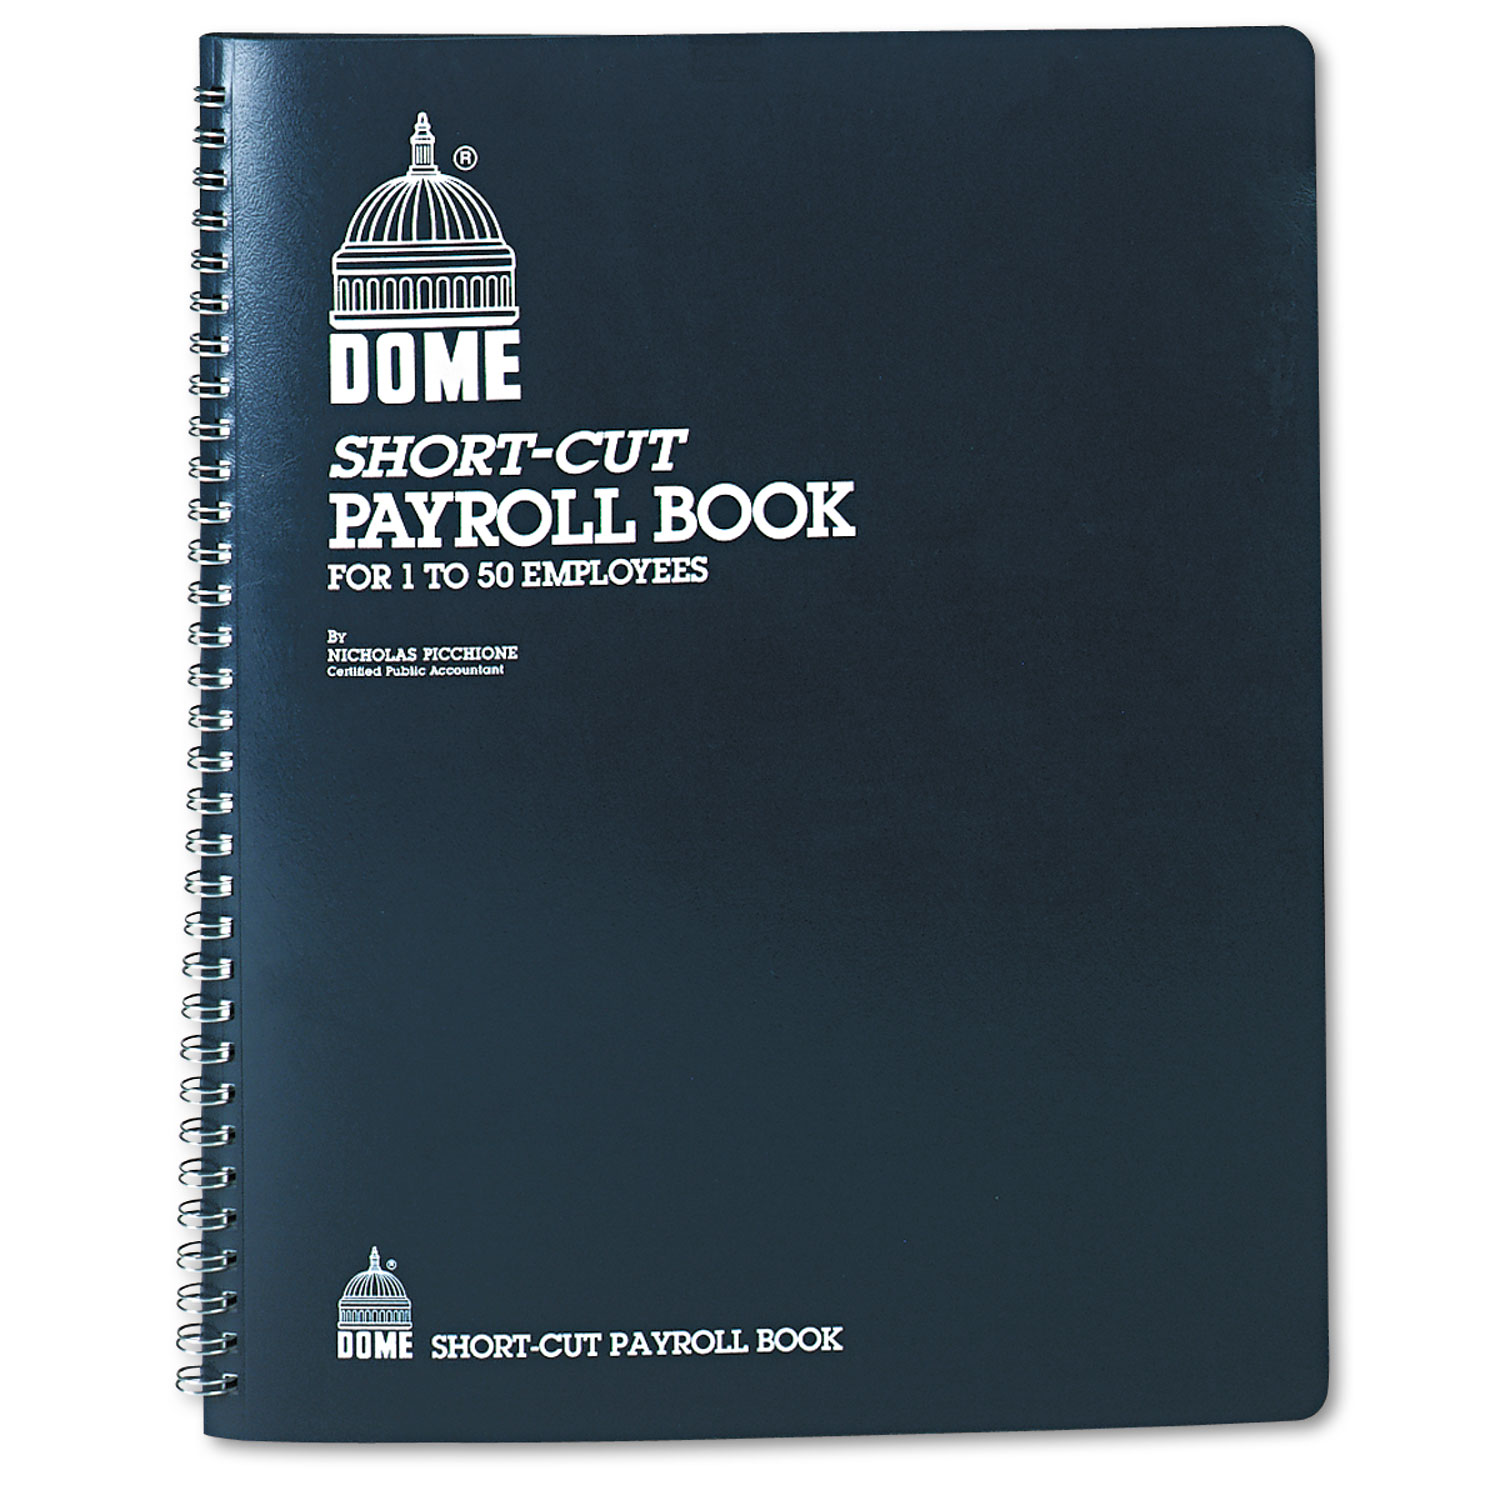  Dome 650 Payroll Record, Single Entry System, Blue Vinyl Cover, 8 3/4 x11 1/4 Pages (DOM650) 